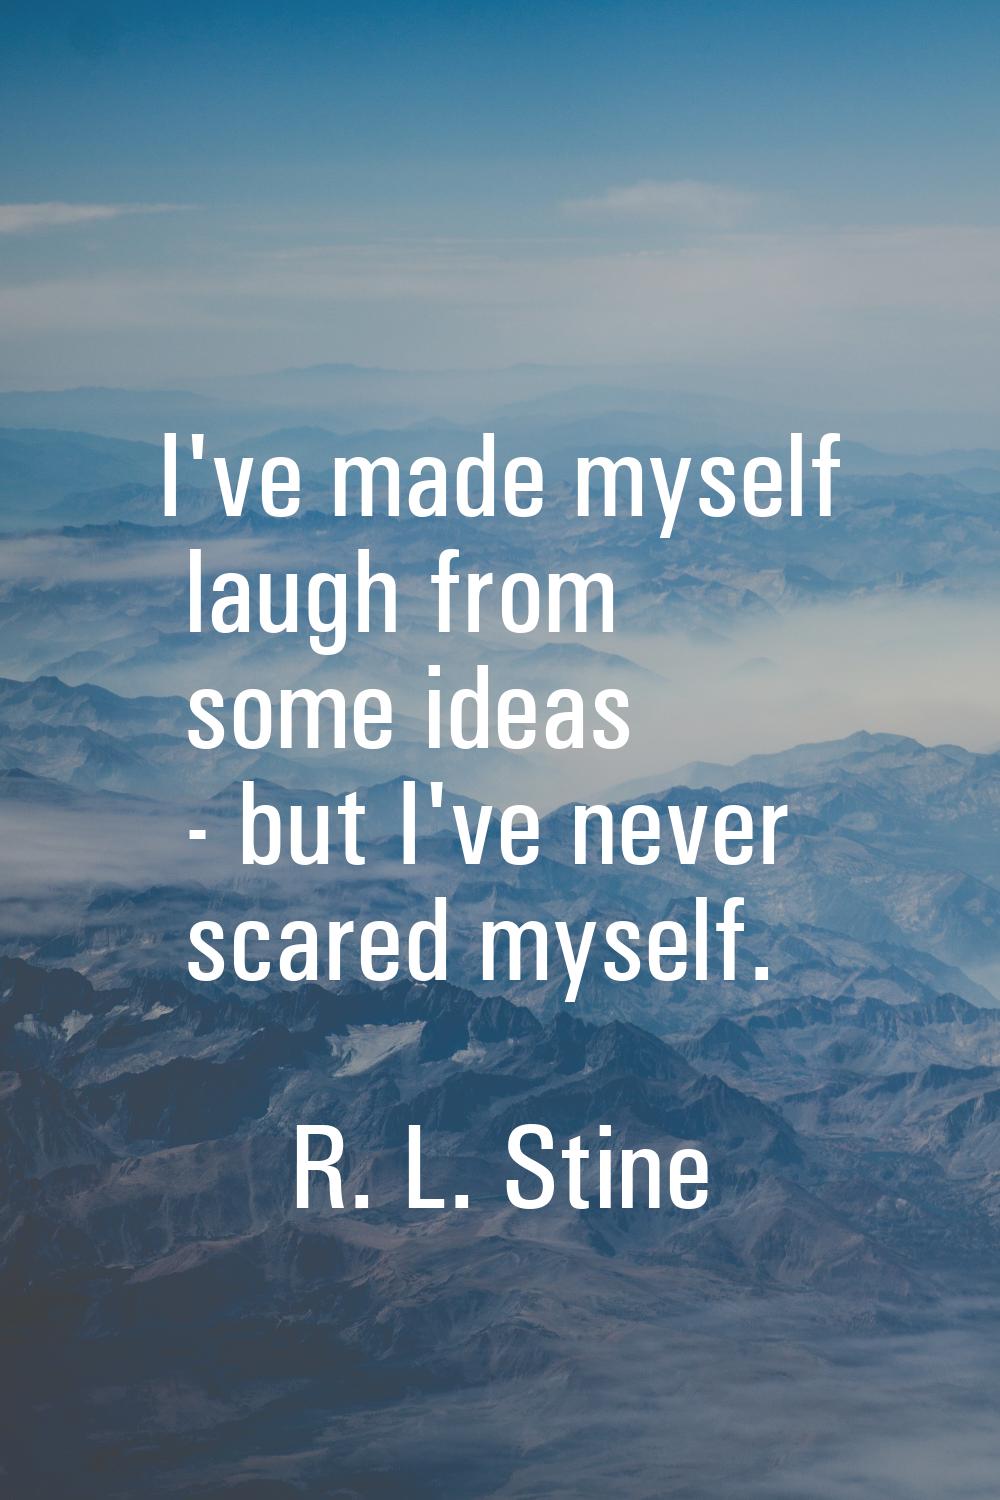 I've made myself laugh from some ideas - but I've never scared myself.